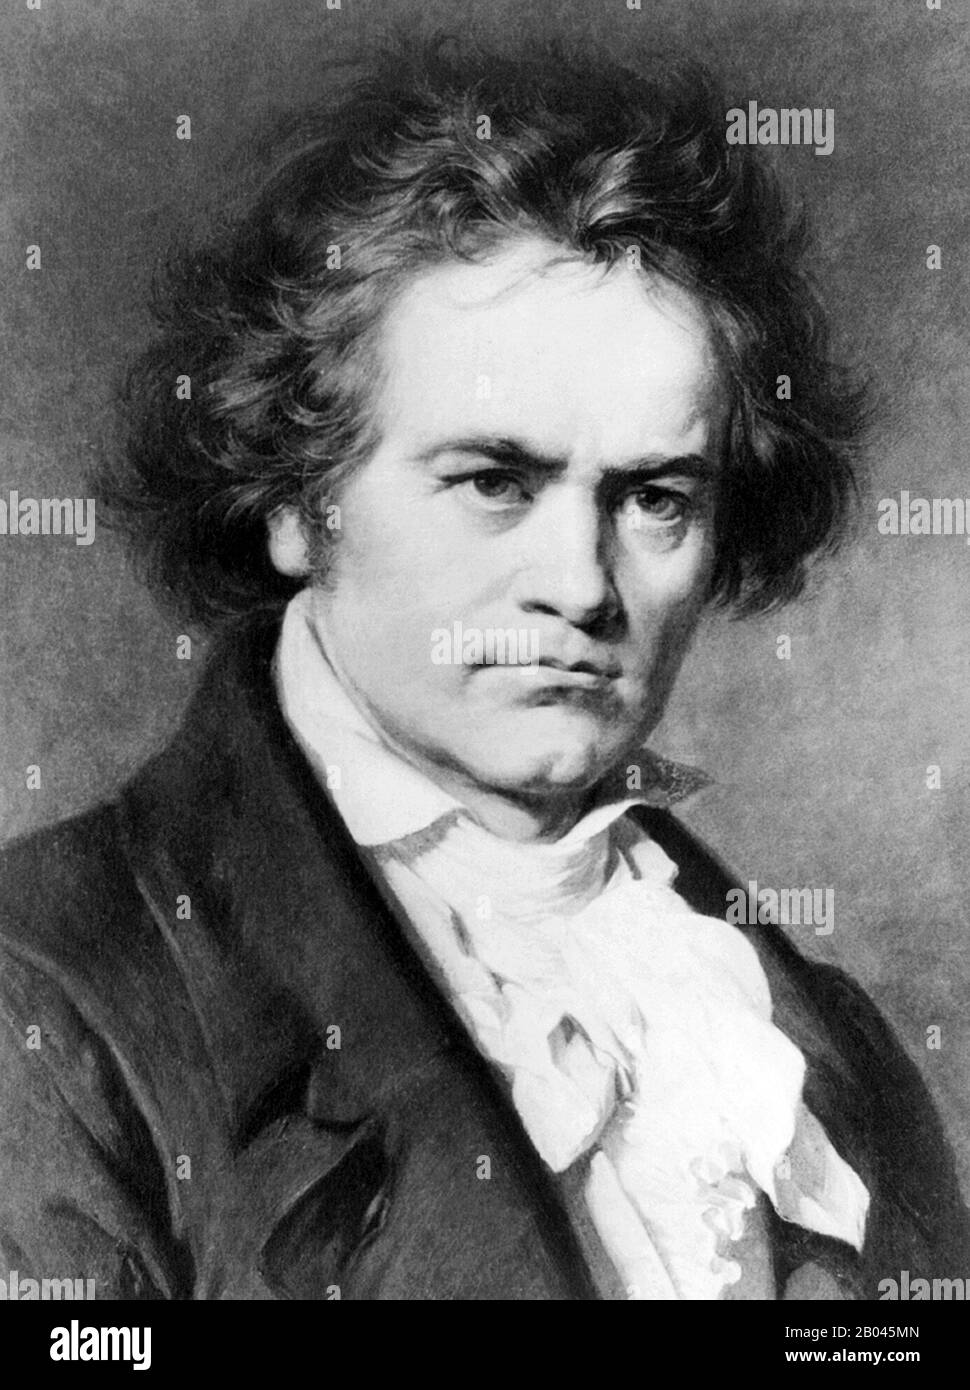 Vintage portrait of German composer and pianist Ludwig van Beethoven (1770 – 1827). Undated print based on a painting by Carl Jaeger (1833 – 1887). Stock Photo